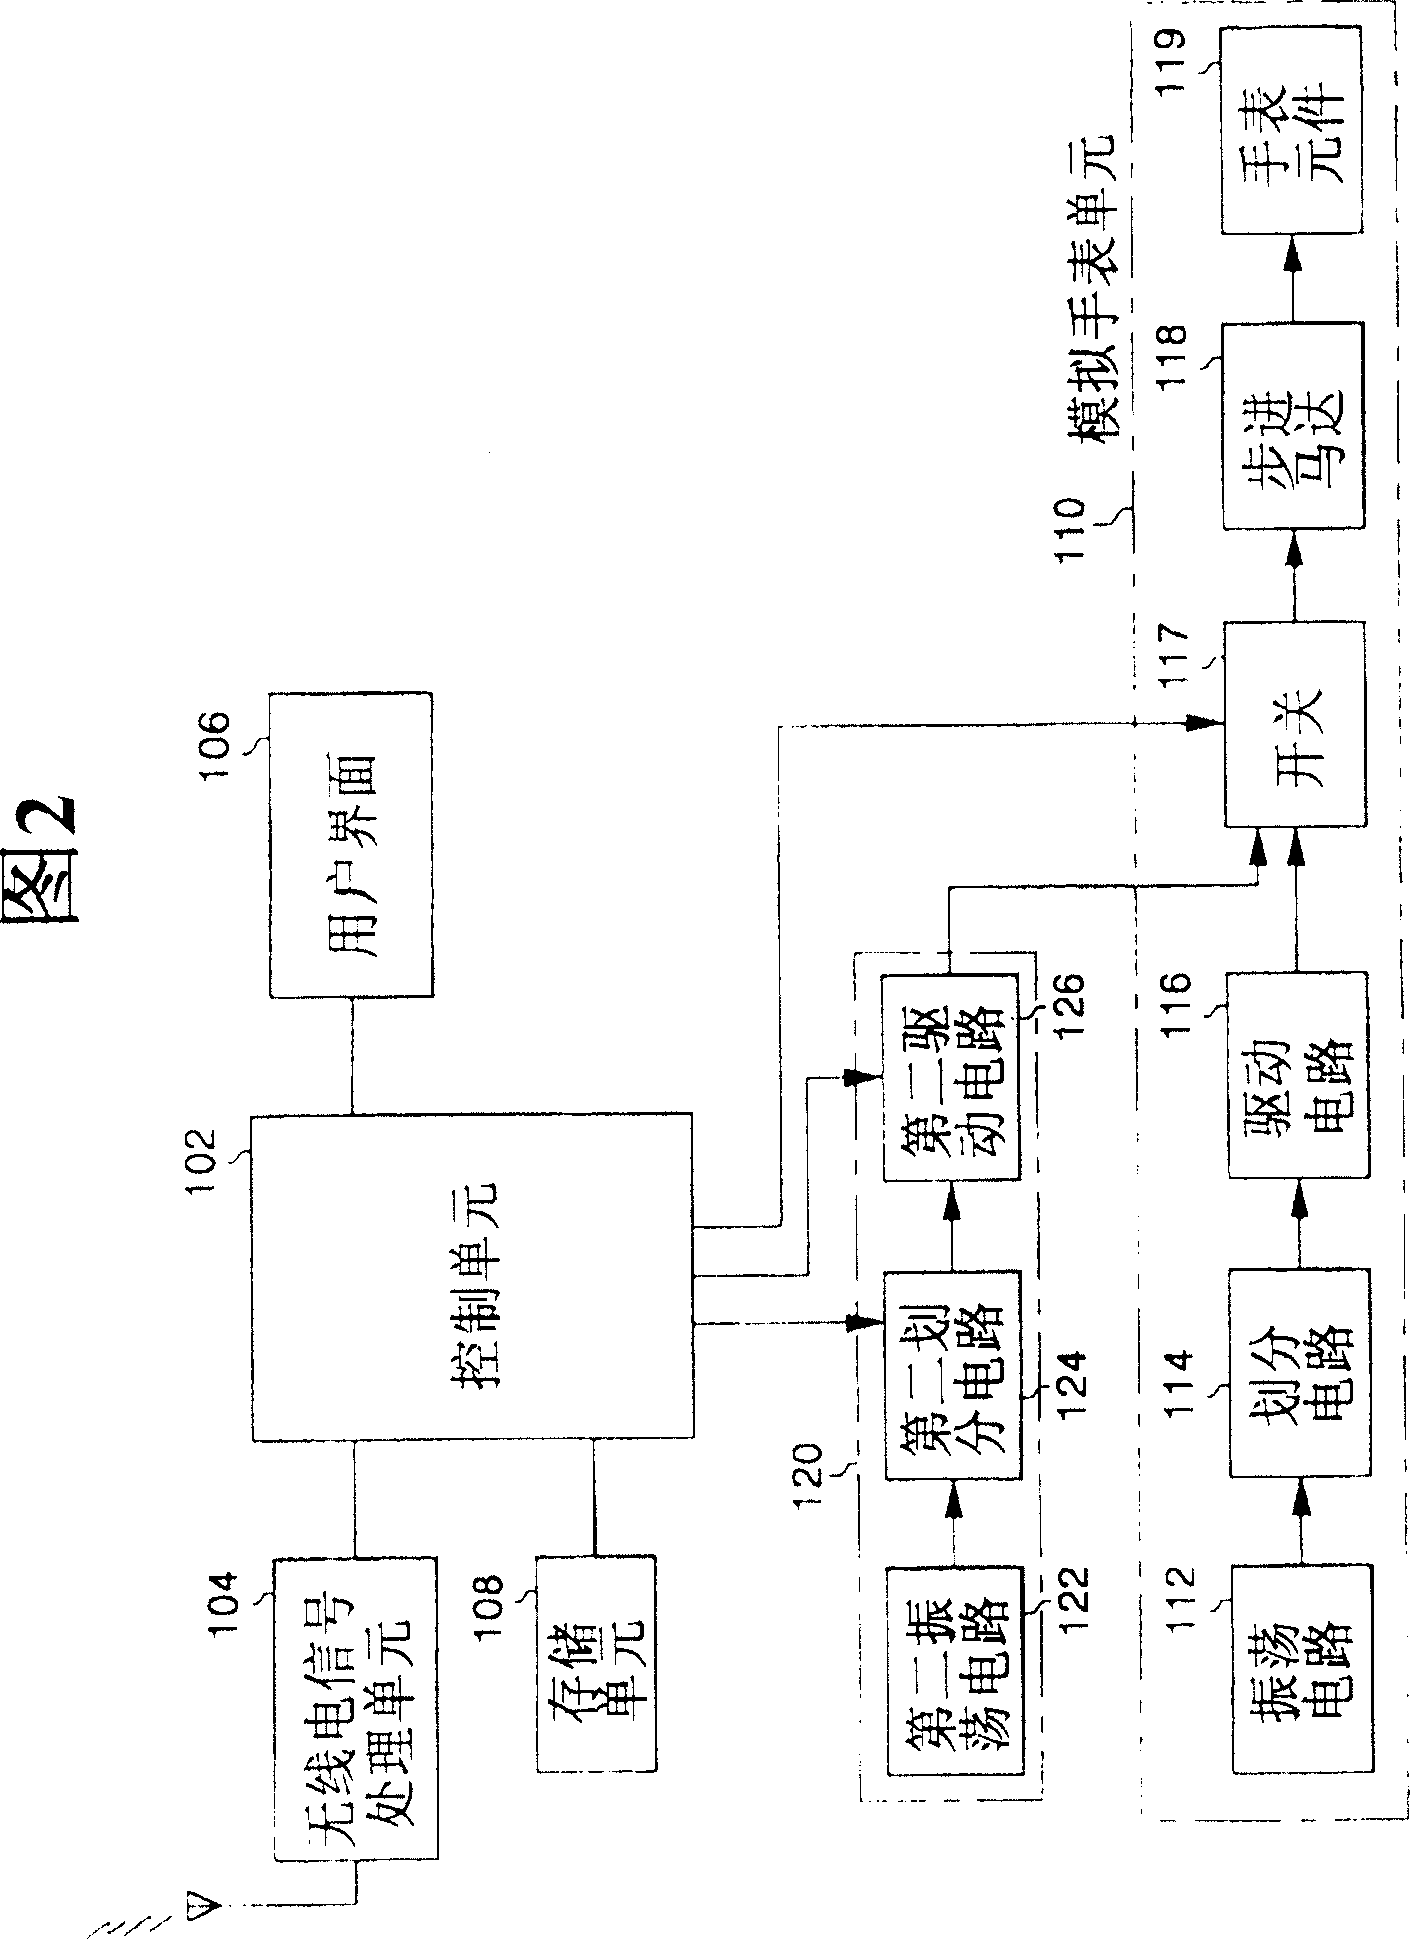 Apparatus and method for adjustnig time in a terminal with built-in analog watch